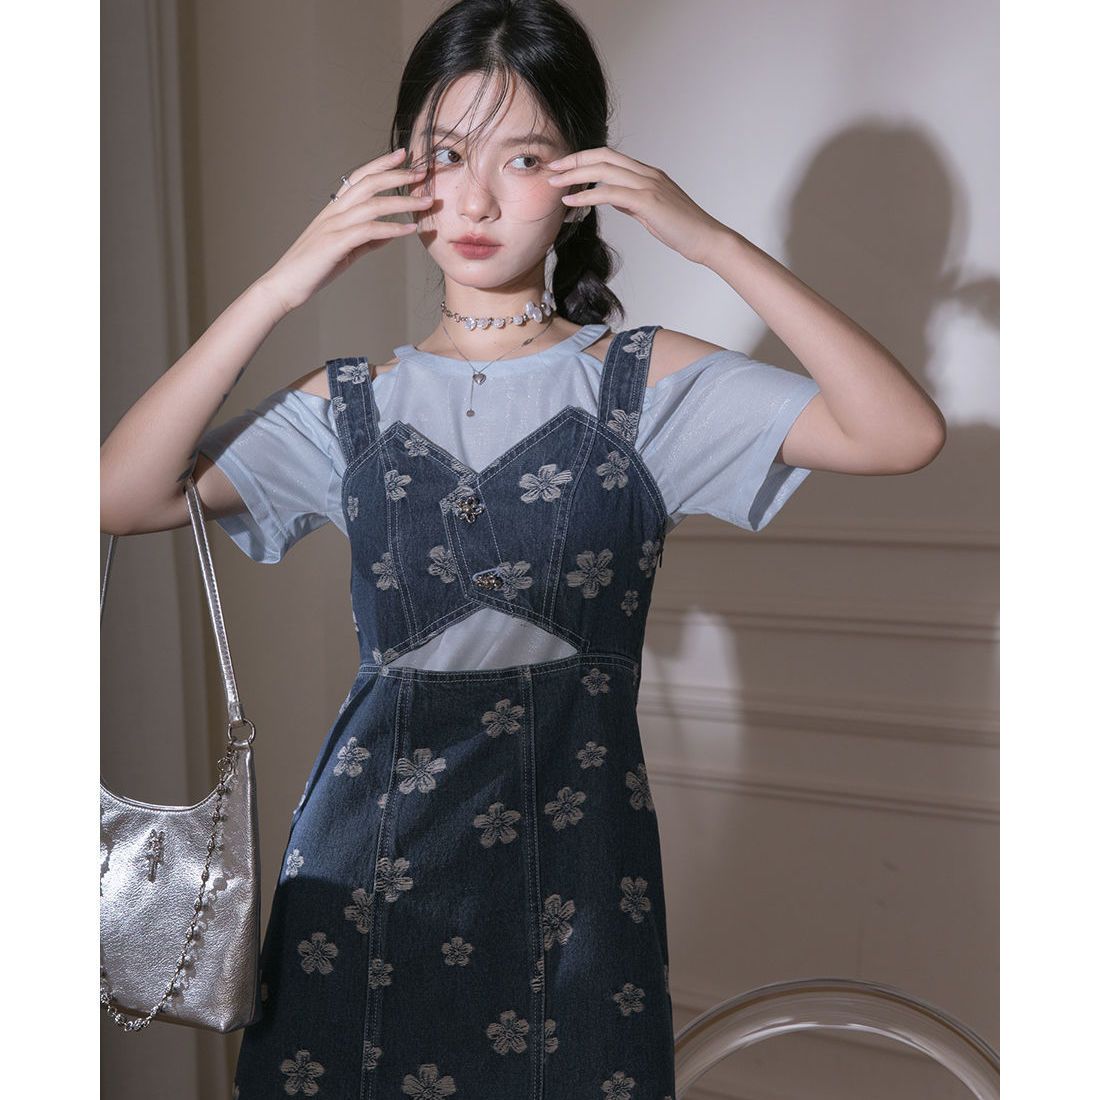 Light cooked style women's clothing Hong Kong flavor salt system wearing off-the-shoulder top blue suspender skirt two-piece suit dress female summer